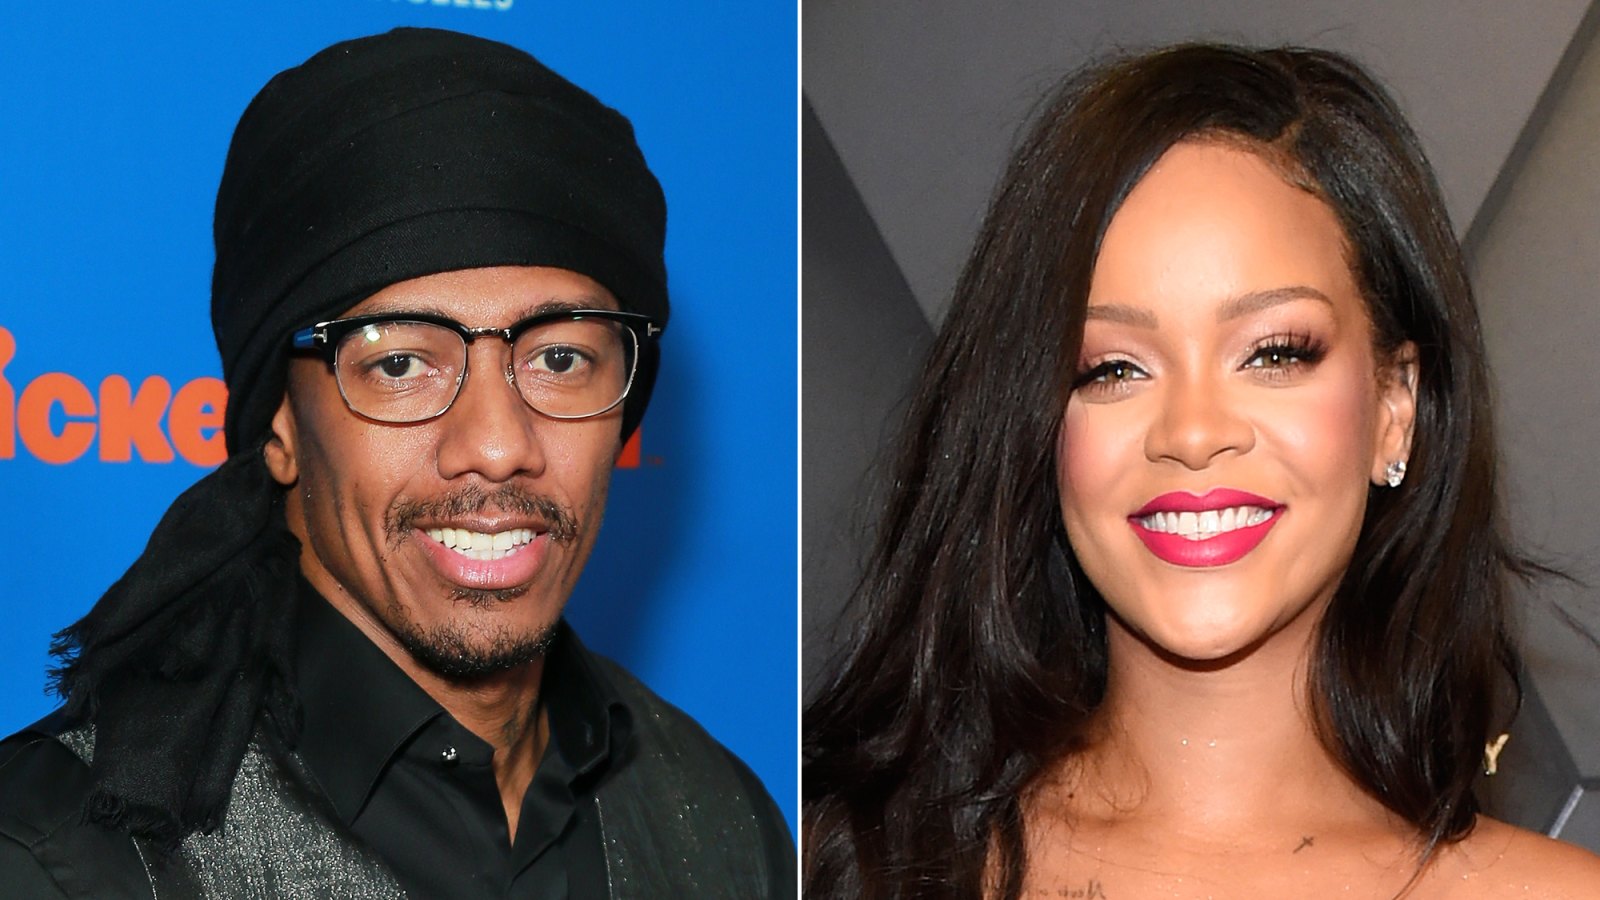 Nick Cannon Tells Queen Rihanna He Wants to Be Her Dress